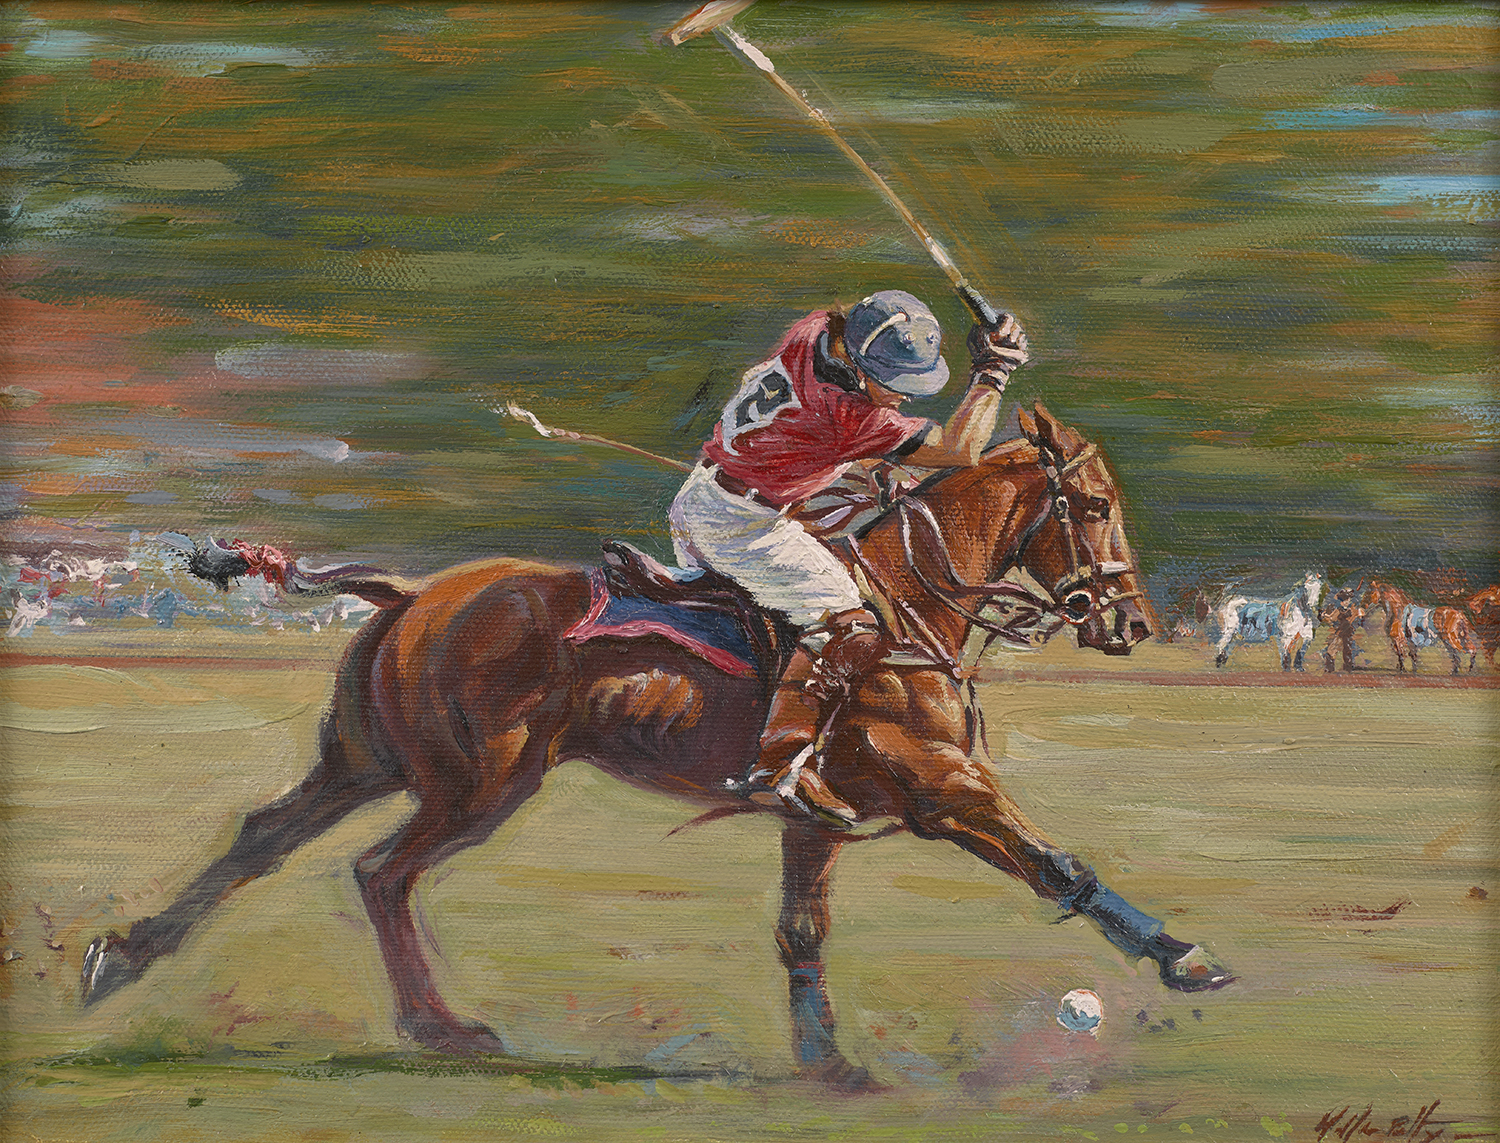 william_petty_p7d_polo_action_1.jpg